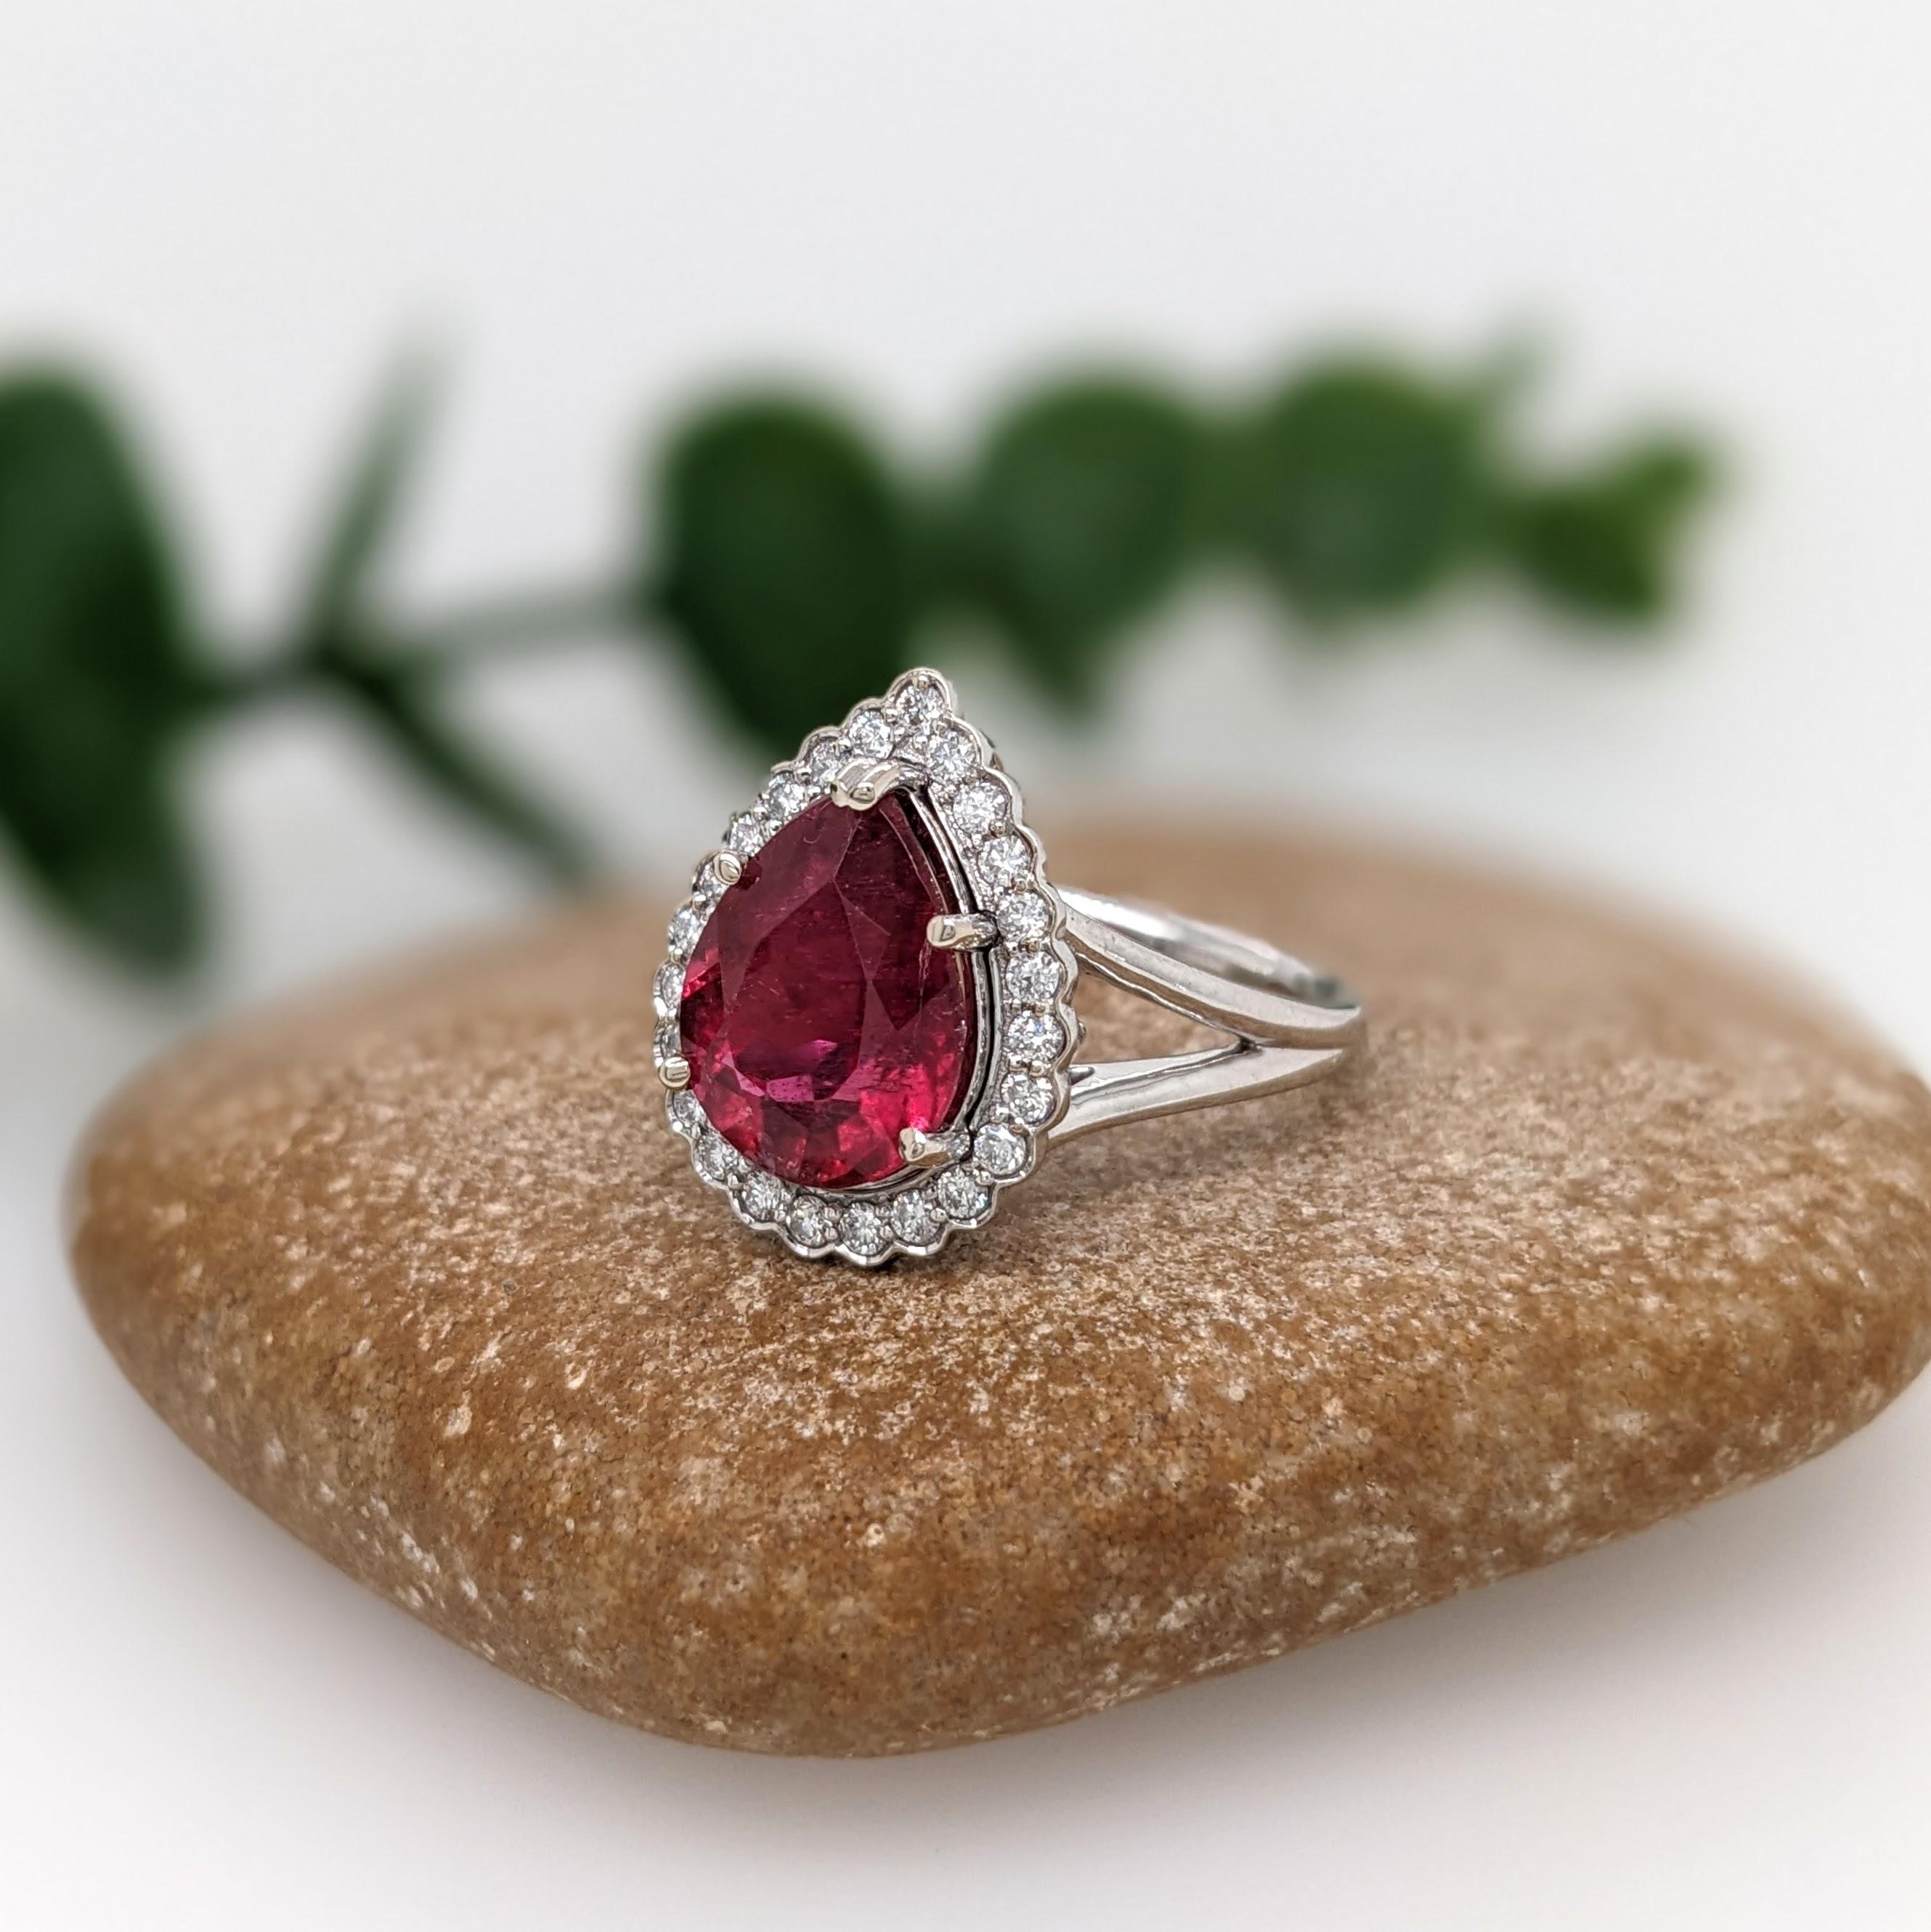 3.4ct Rubellite Tourmaline Ring w Earth Mined Diamonds in Solid 14K Gold PR 11x9 In New Condition For Sale In Columbus, OH